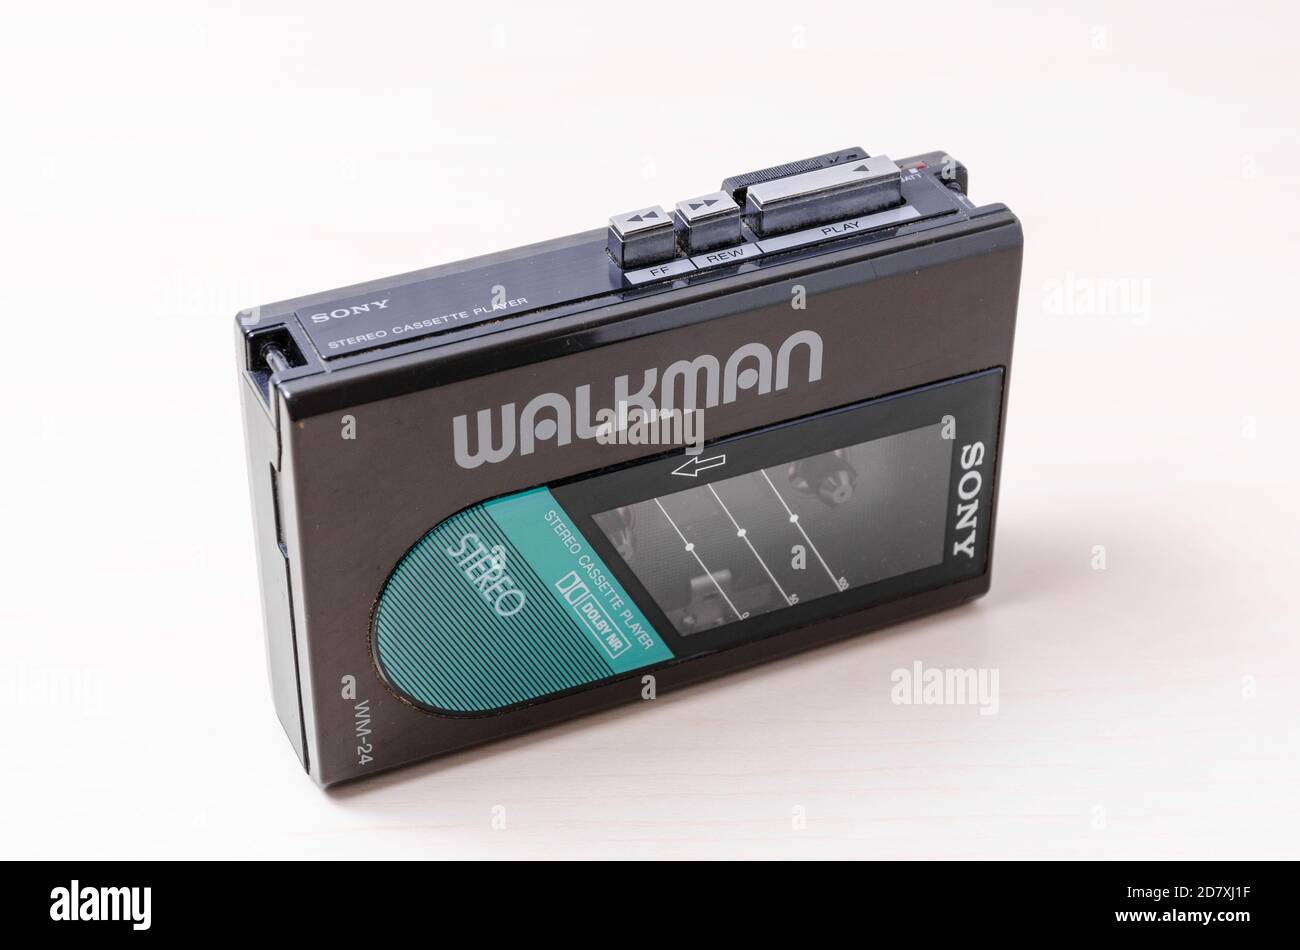 Sony Walkman Cassette Player WM-24, 1984 until 1987, compact audio music, on wooden desk or table, flat lay, studio Stock Photo